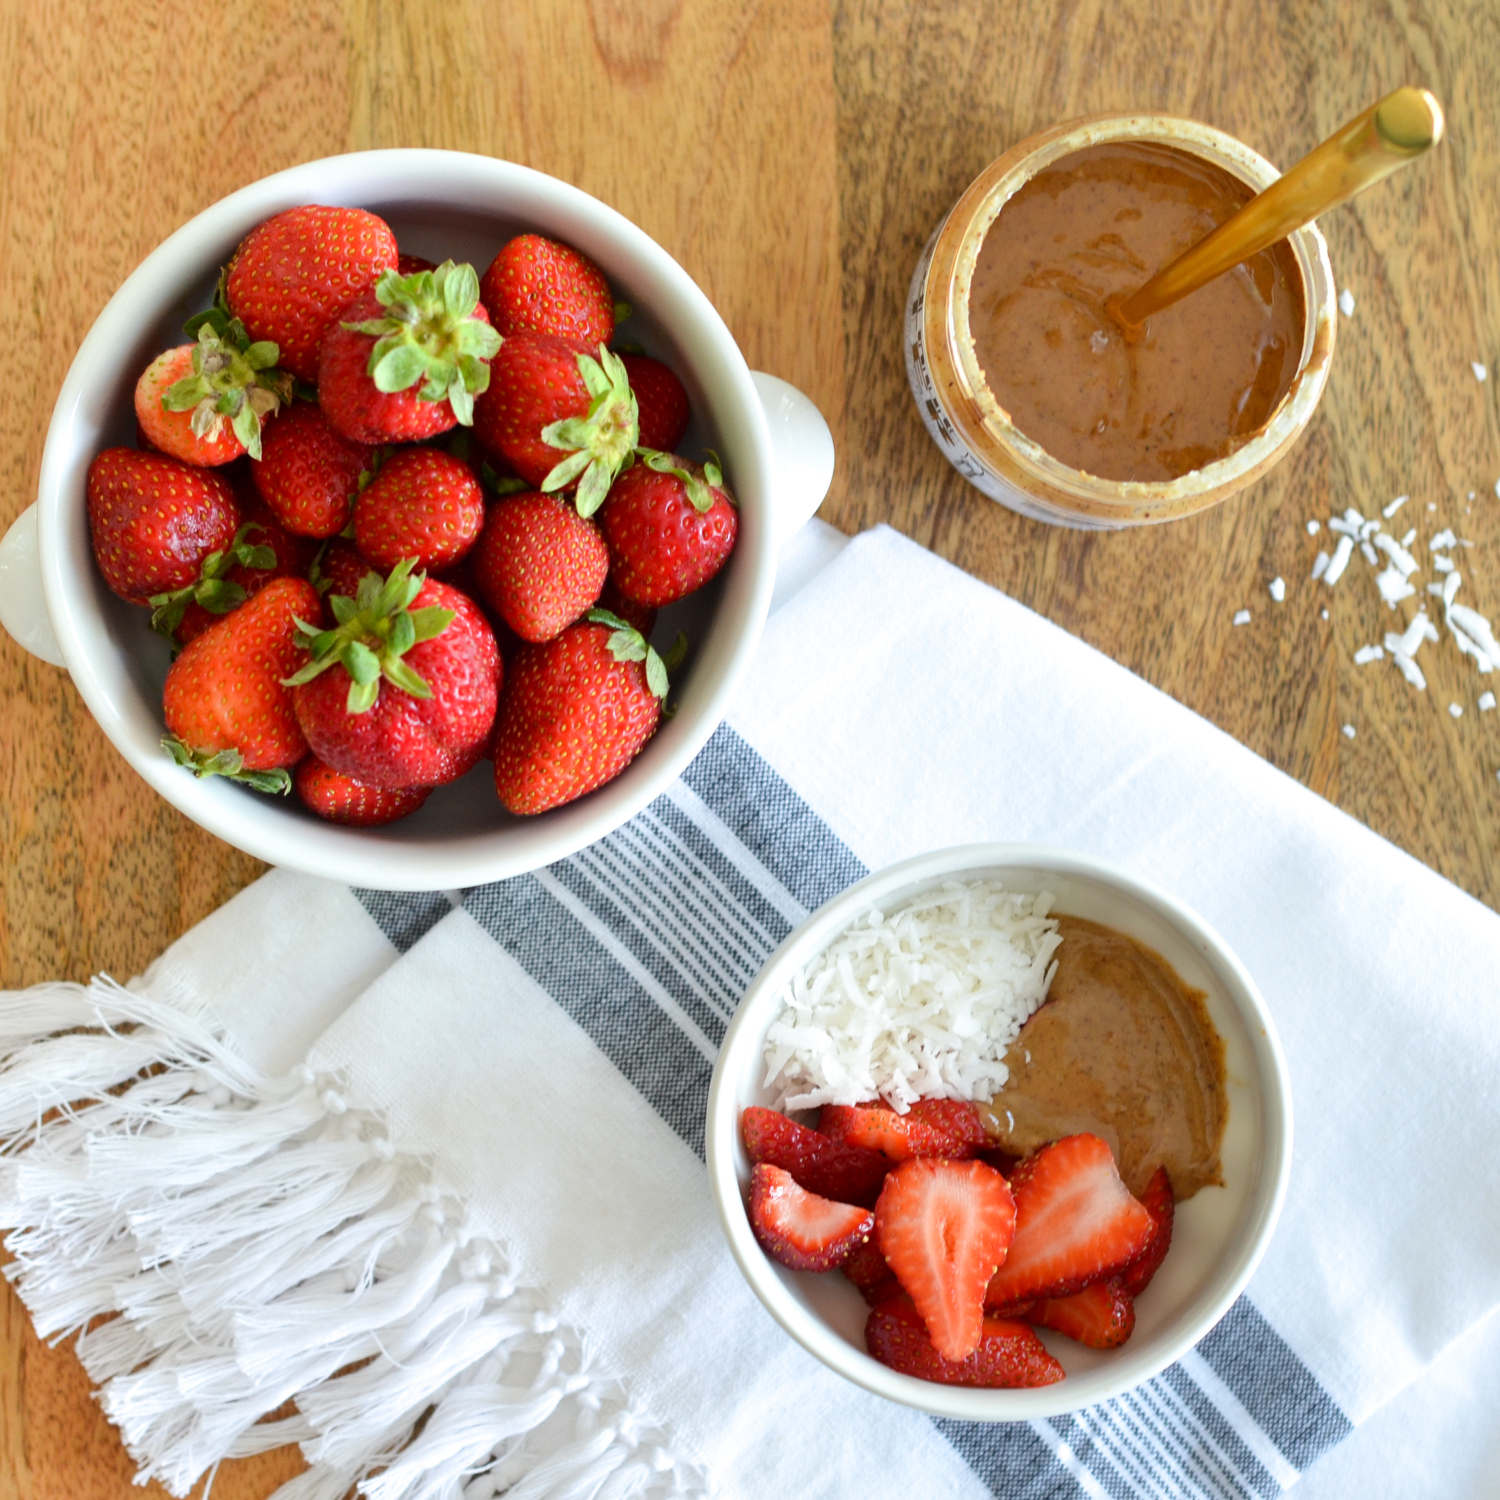 Five easy, no bake, healthy dessert ideas sure to satisfy your sweet tooth!